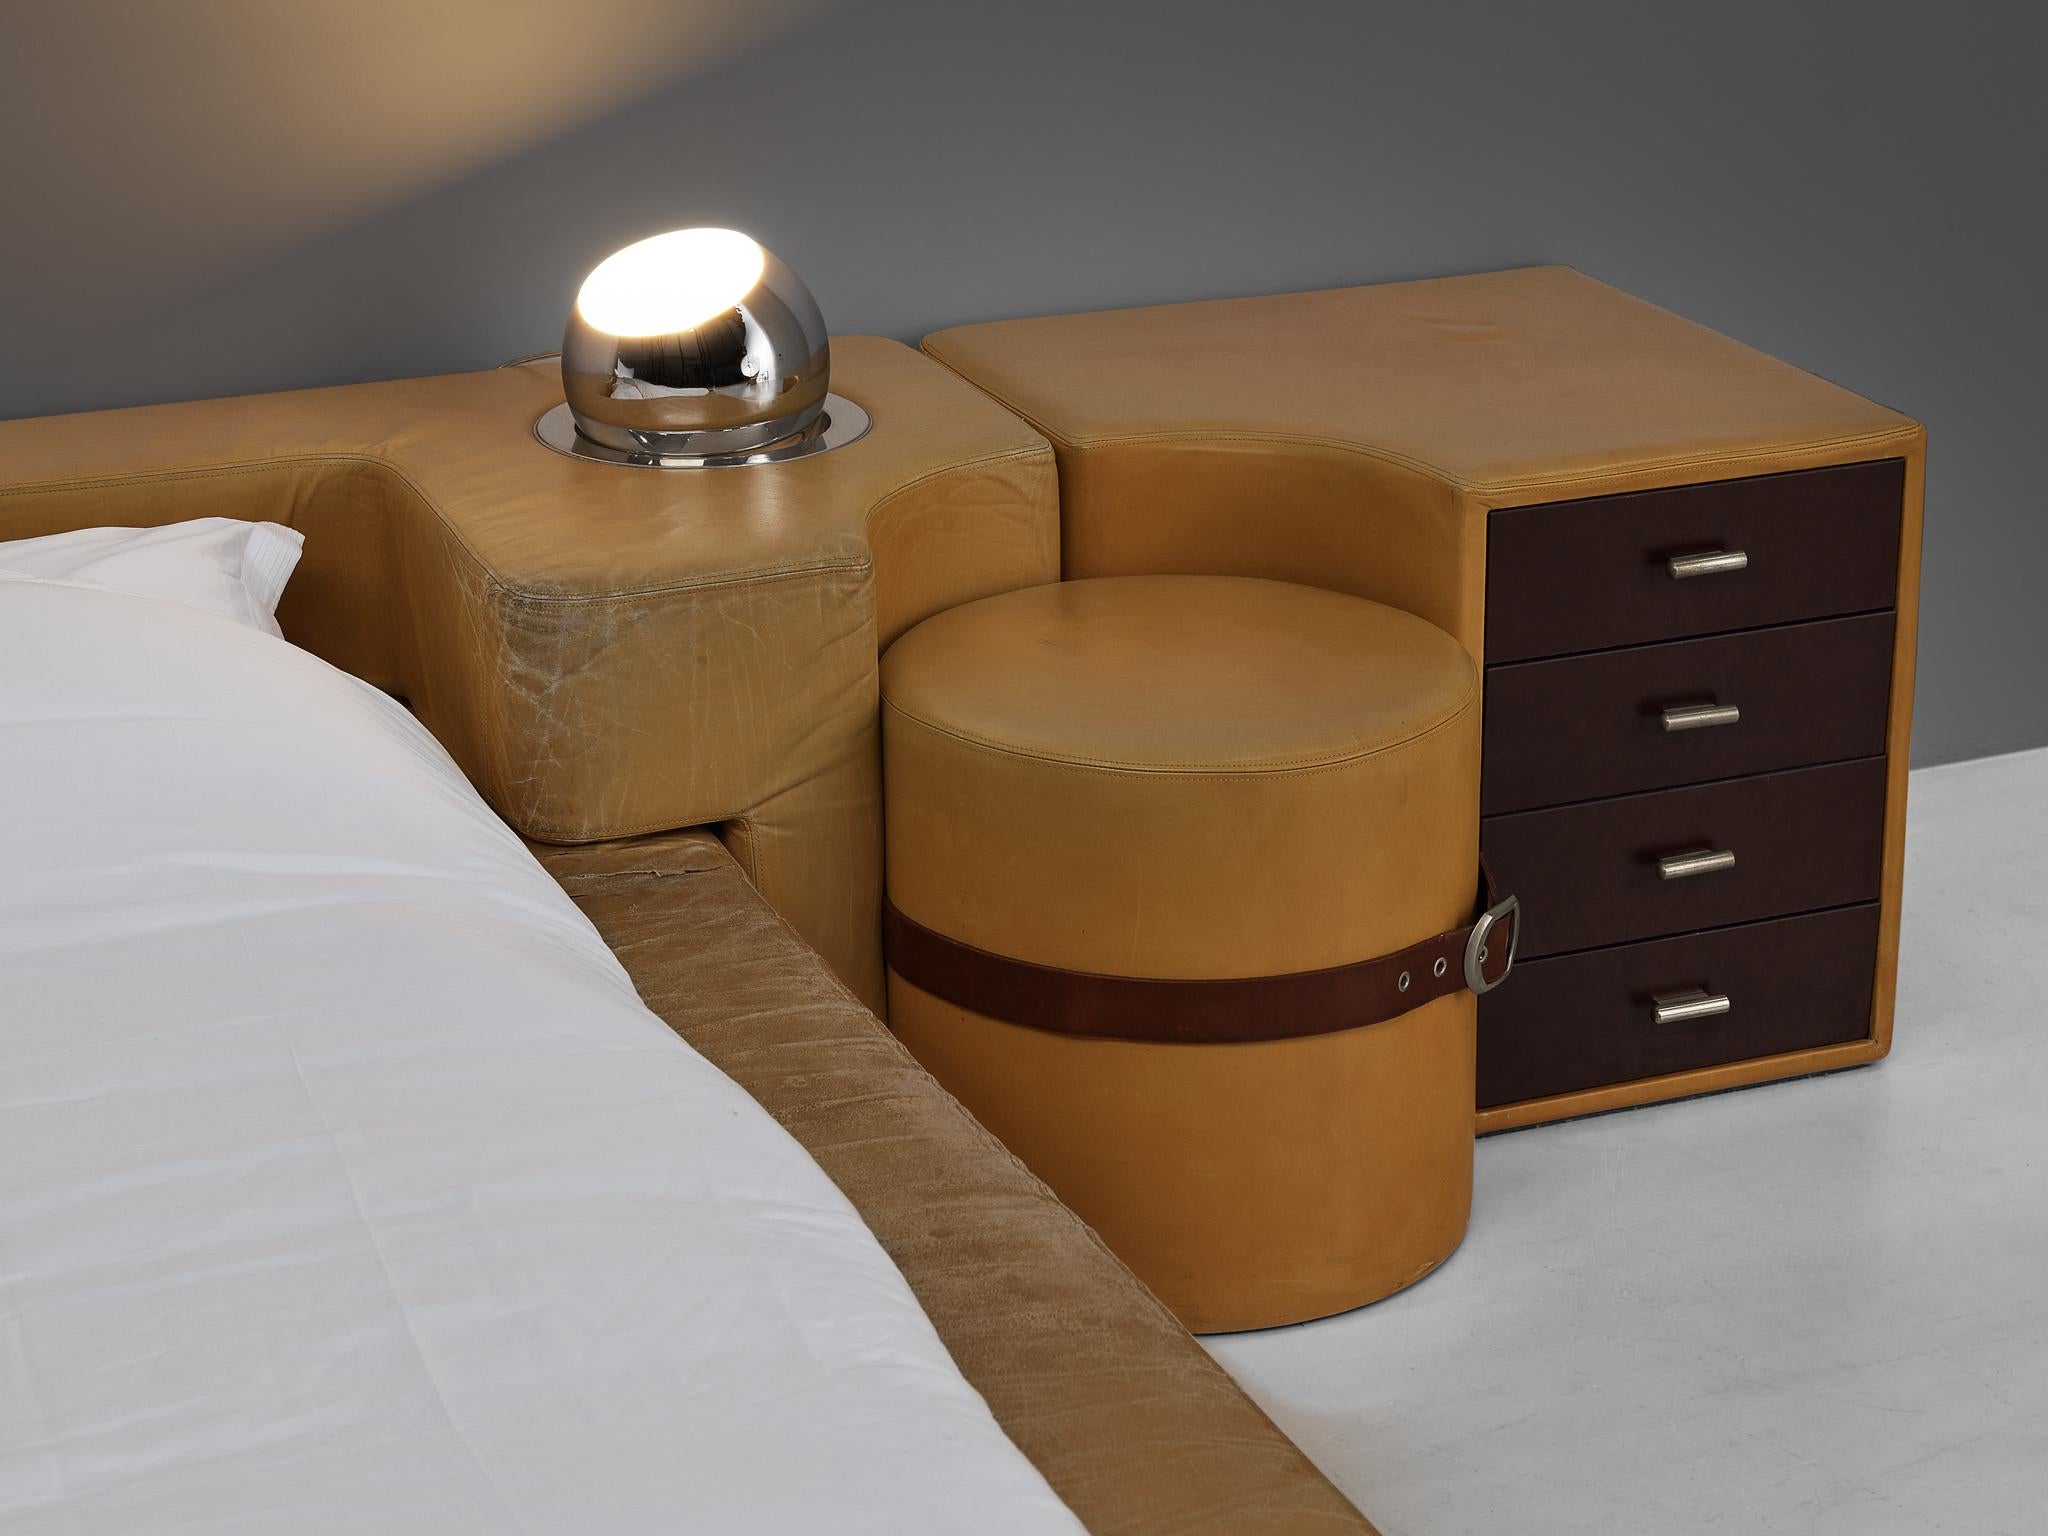 Brass Guido Faleschini for Mariani Set of Bed, Nightstands and Stools in Leather